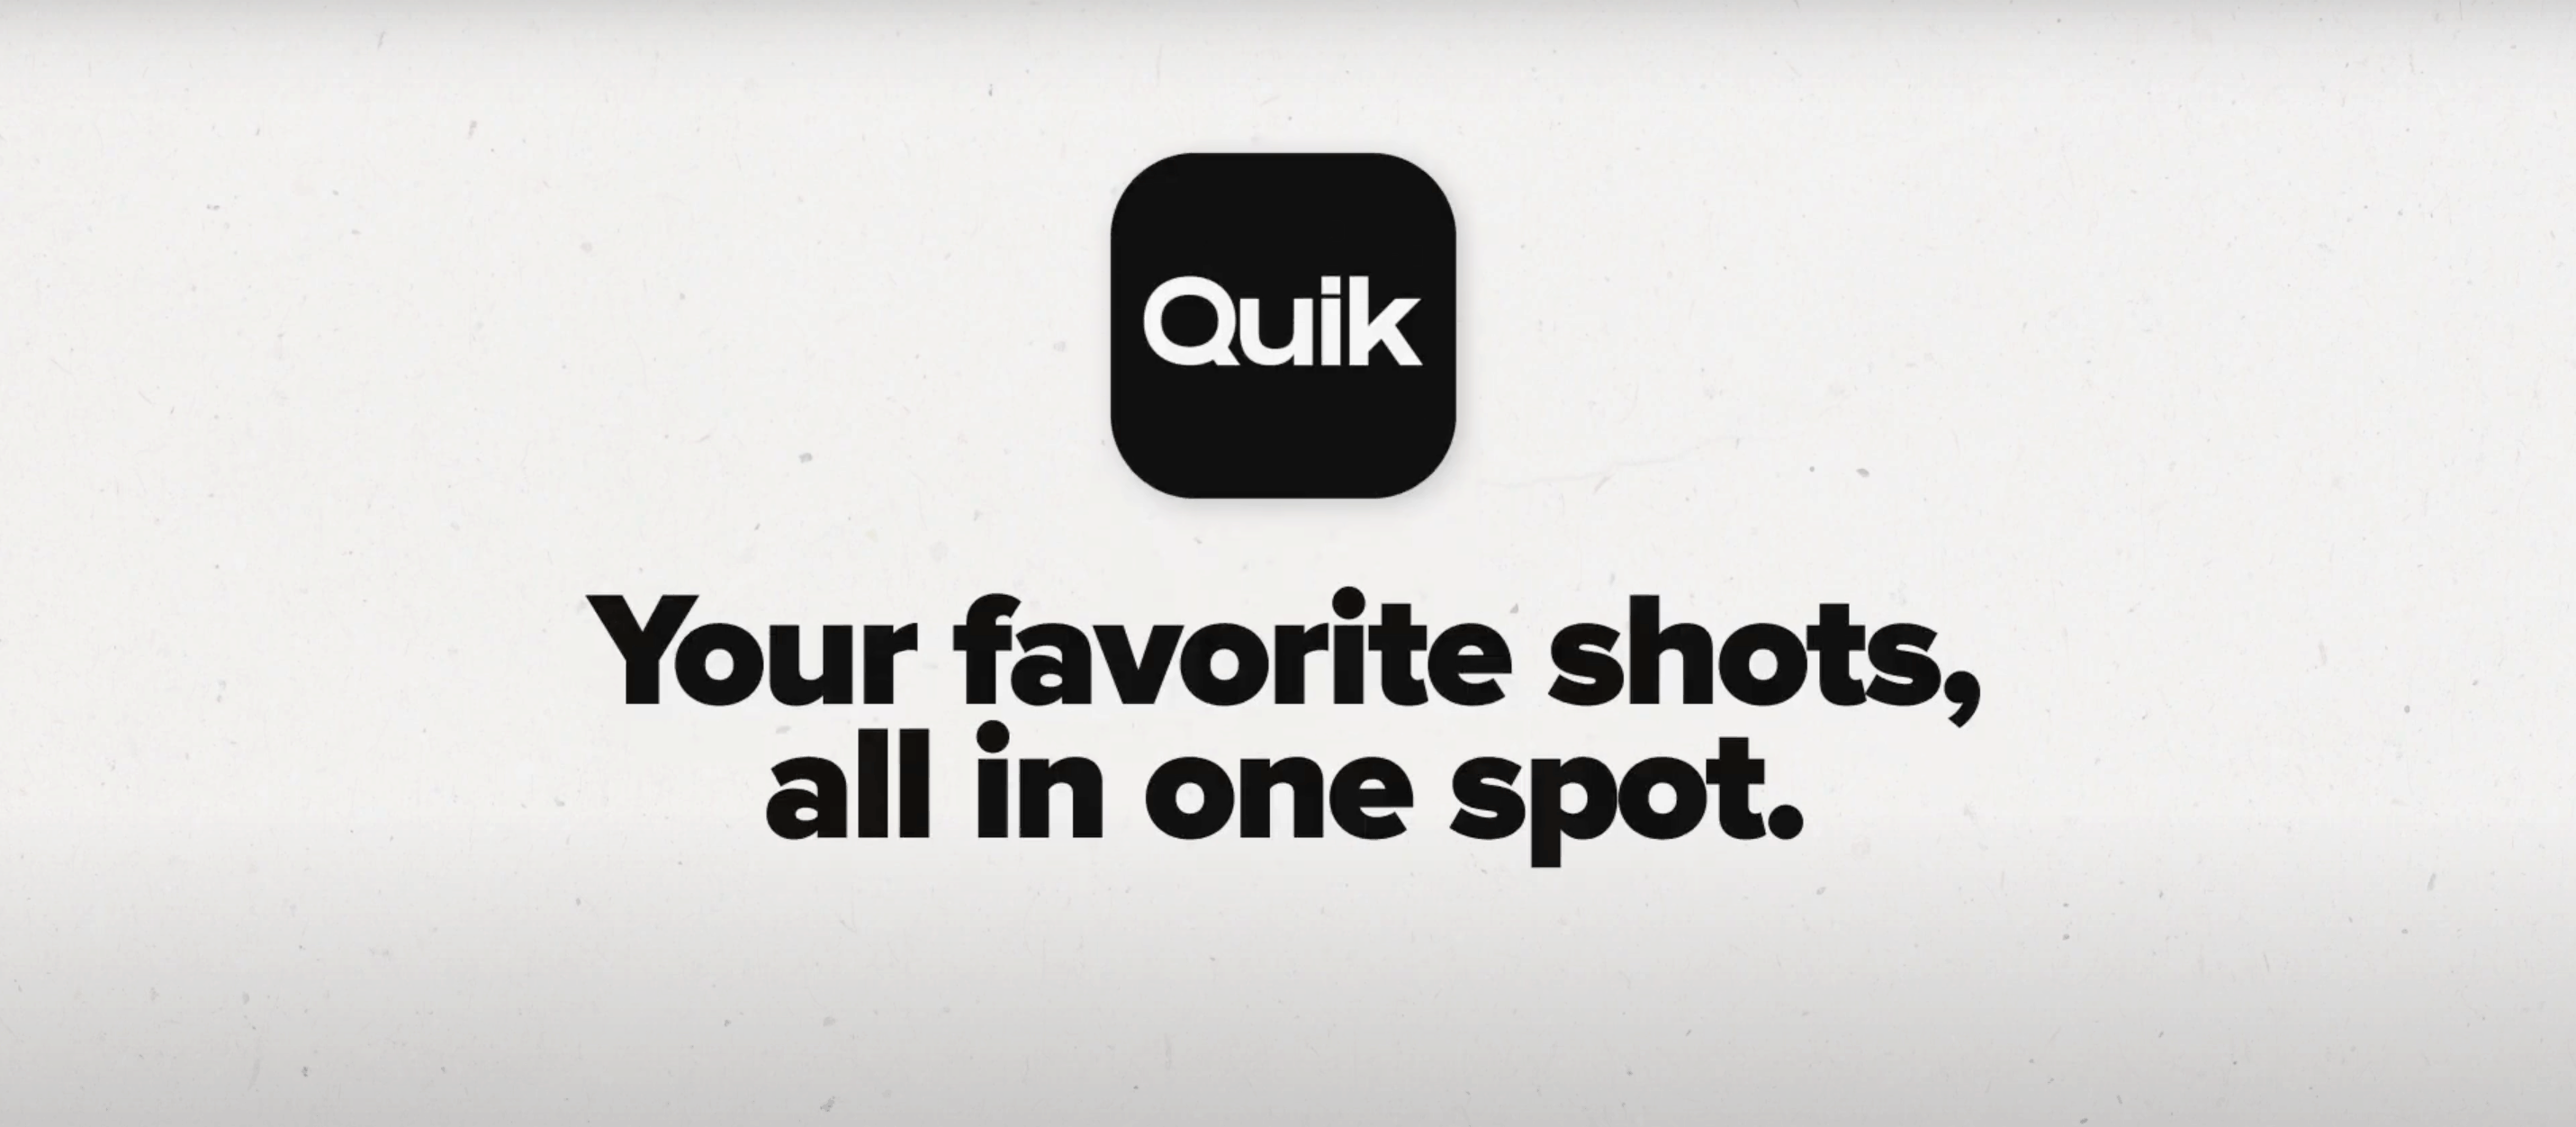 GoPro’s New App ‘Quik’ Helps You Get the Most Out of Your Photos and Videos, No Matter What Phone or Camera You’re Using